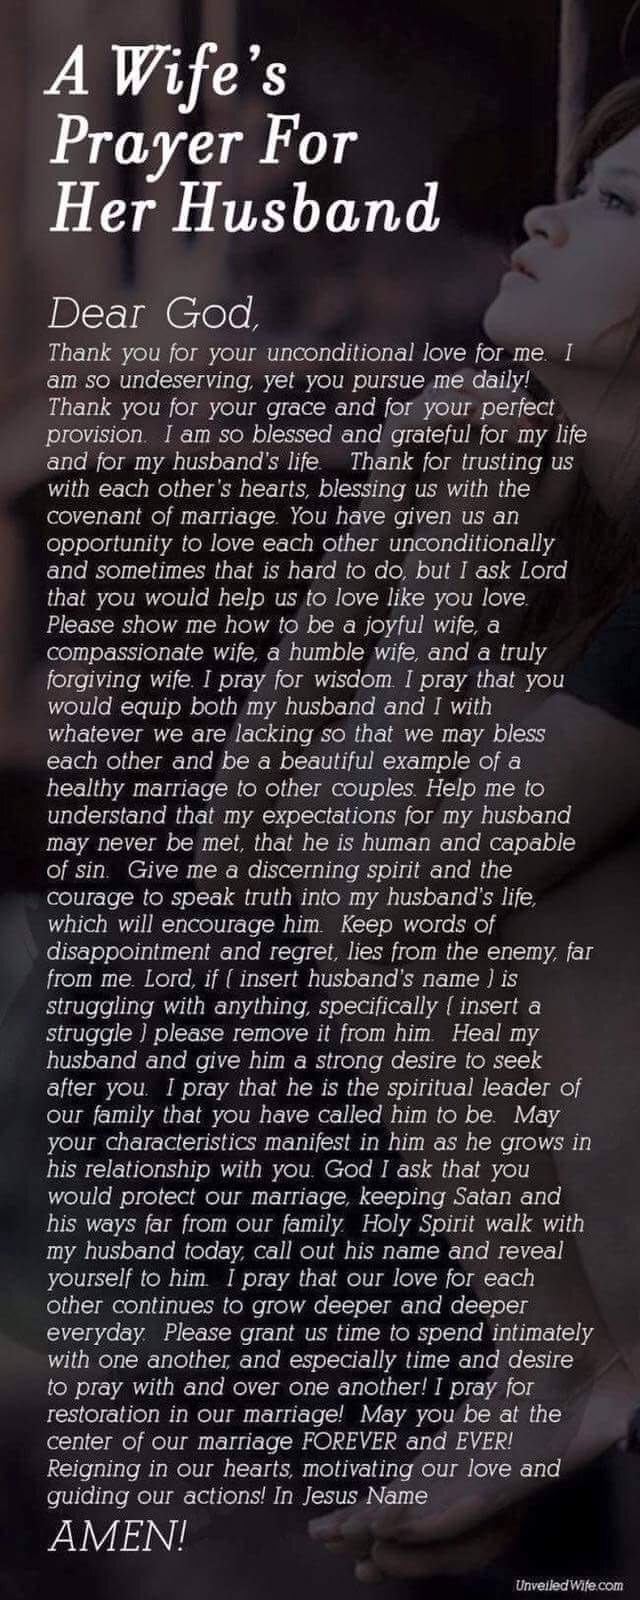 A Wife's Prayer for Her Husband